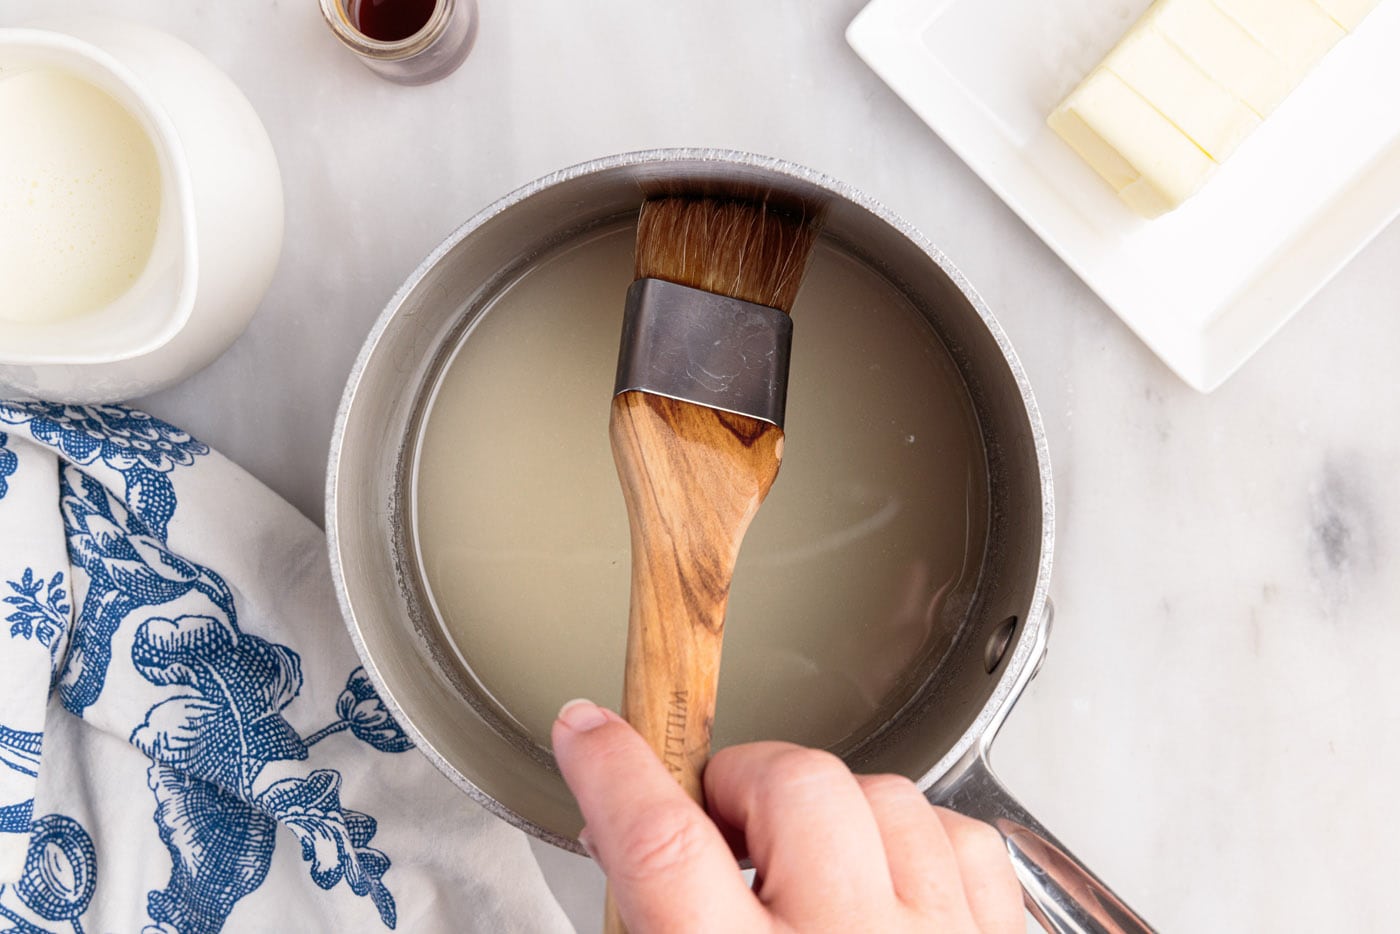 wiping down side of saucepan with a pastry brush